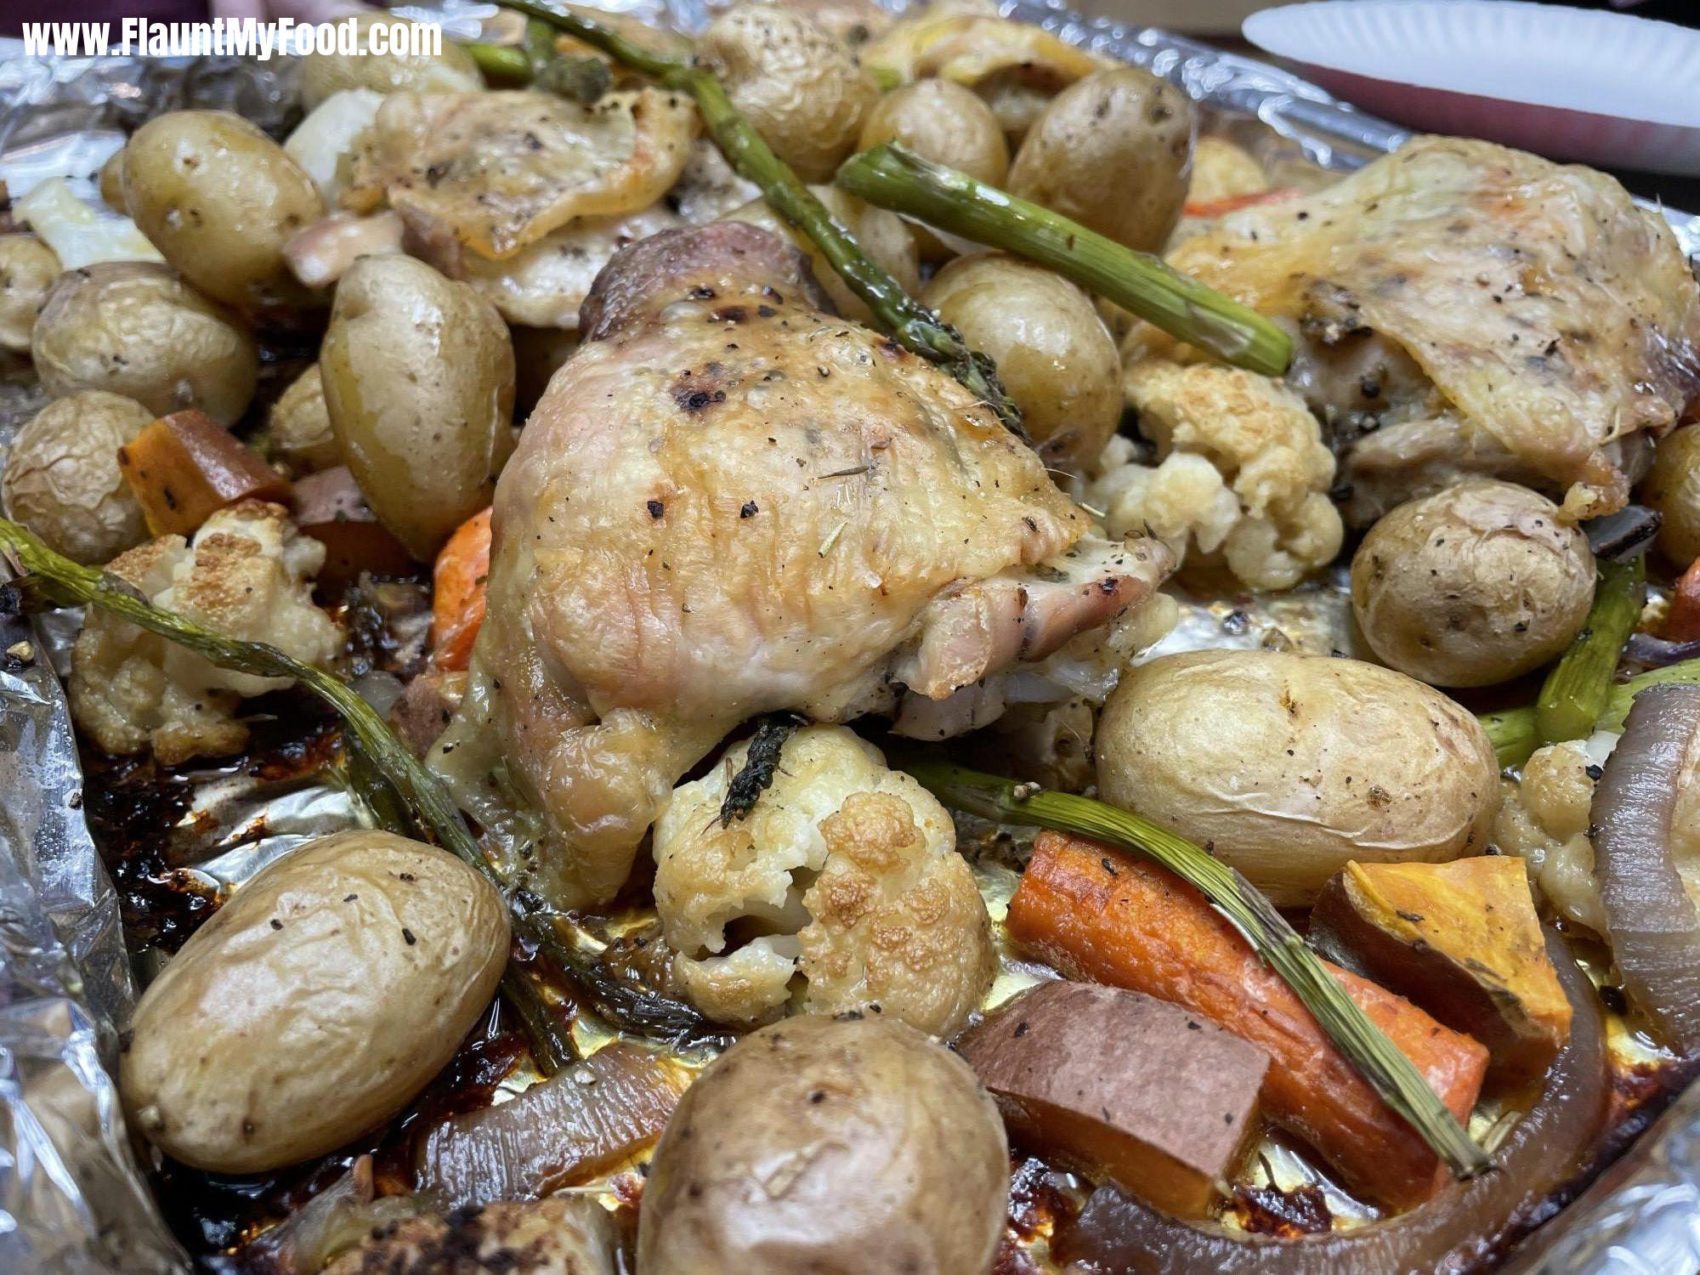 Cooked chicken with vegetables!